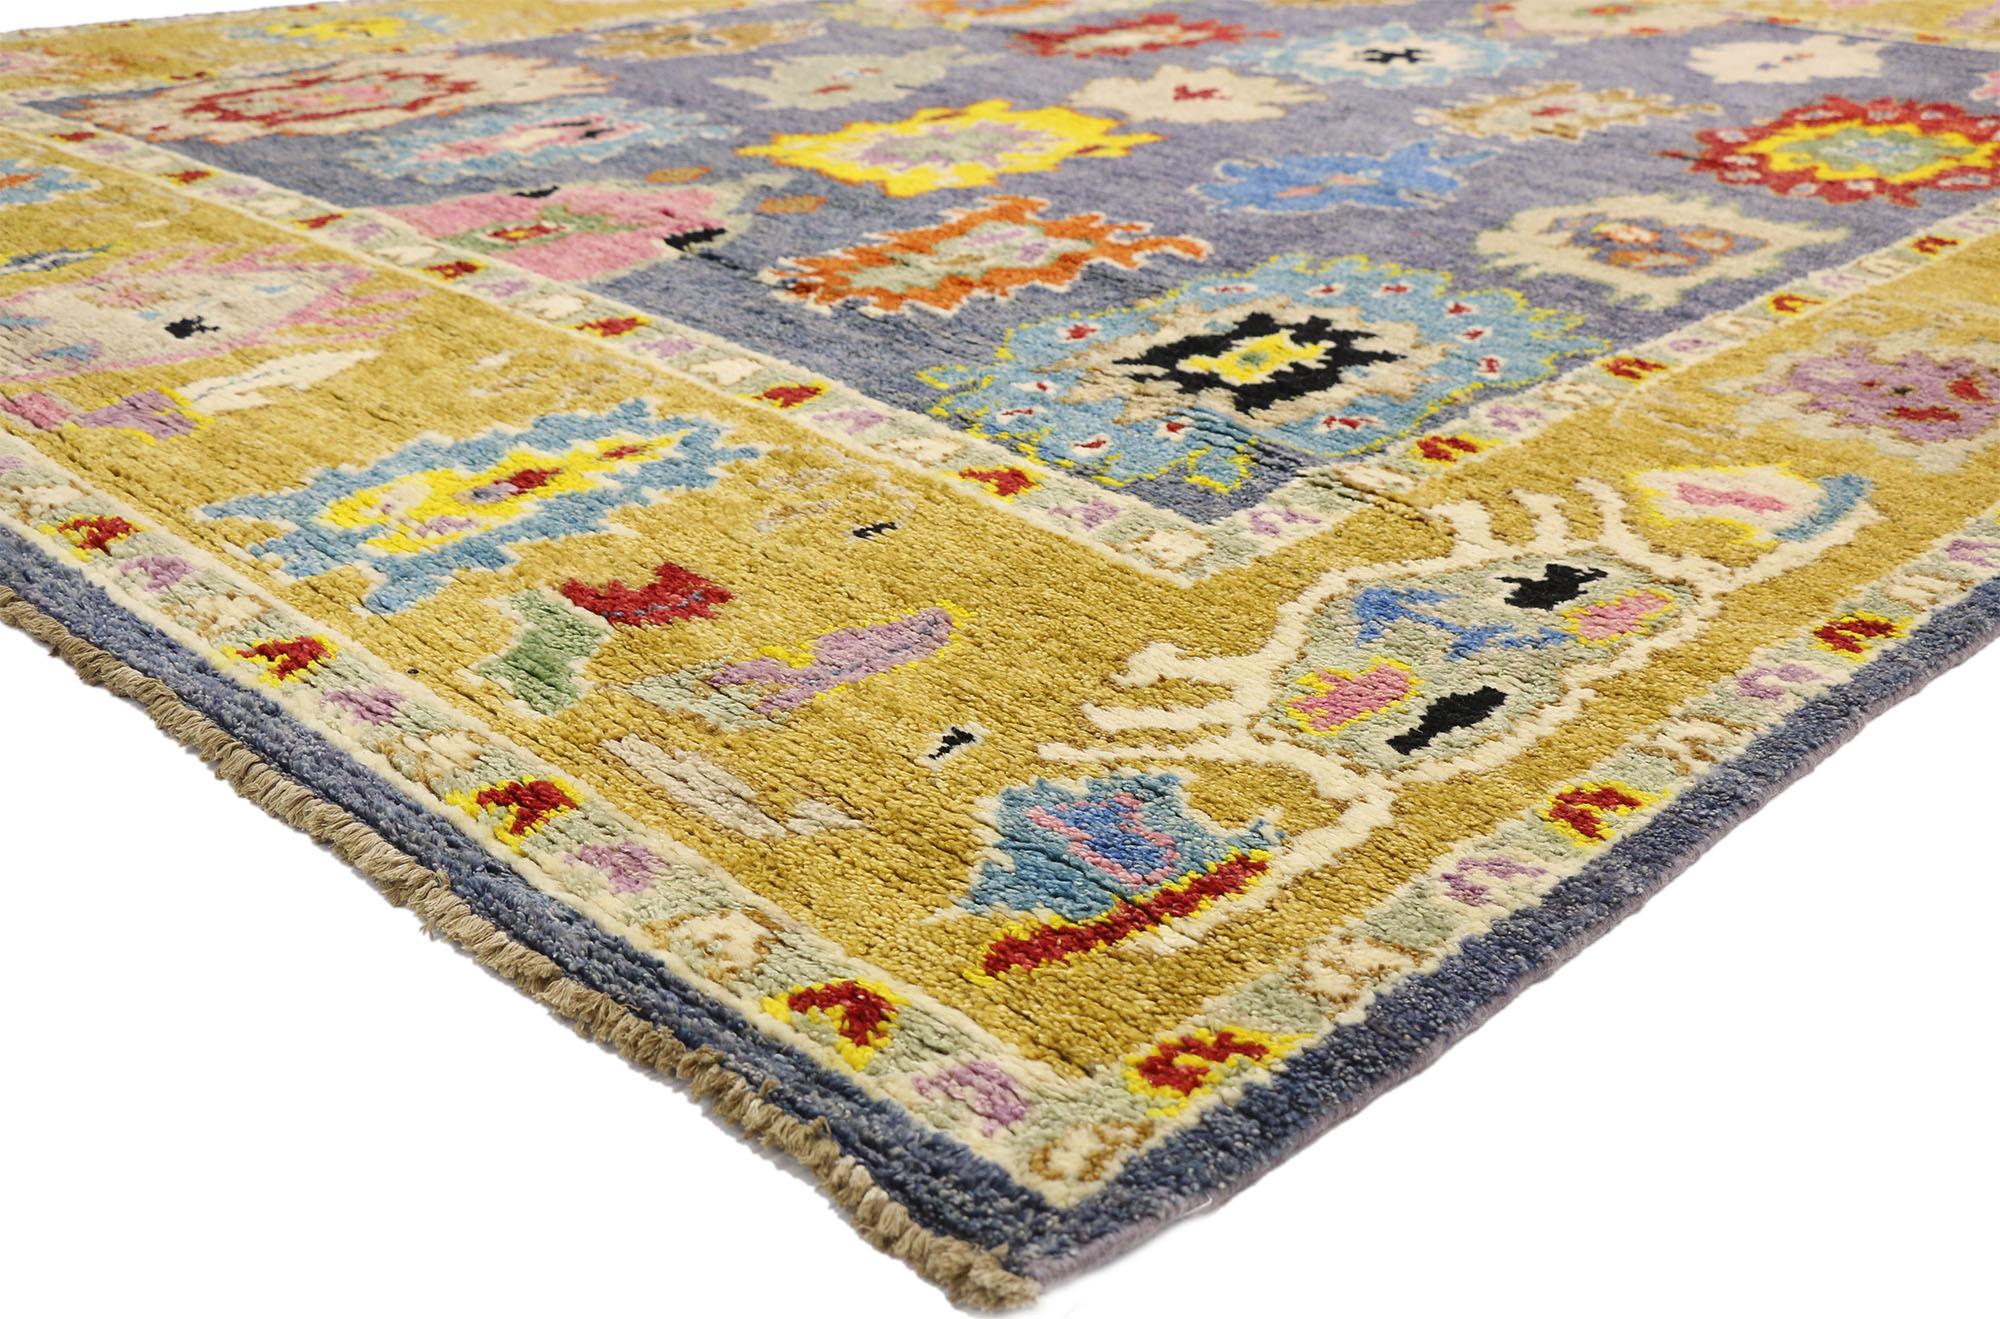 80486 contemporary Moroccan area rug with Oushak design pattern and Memphis style. This hand knotted wool contemporary Moroccan area rug showcases an Oushak design with a Memphis style. The all-over large-scale geometric pattern spreads across an